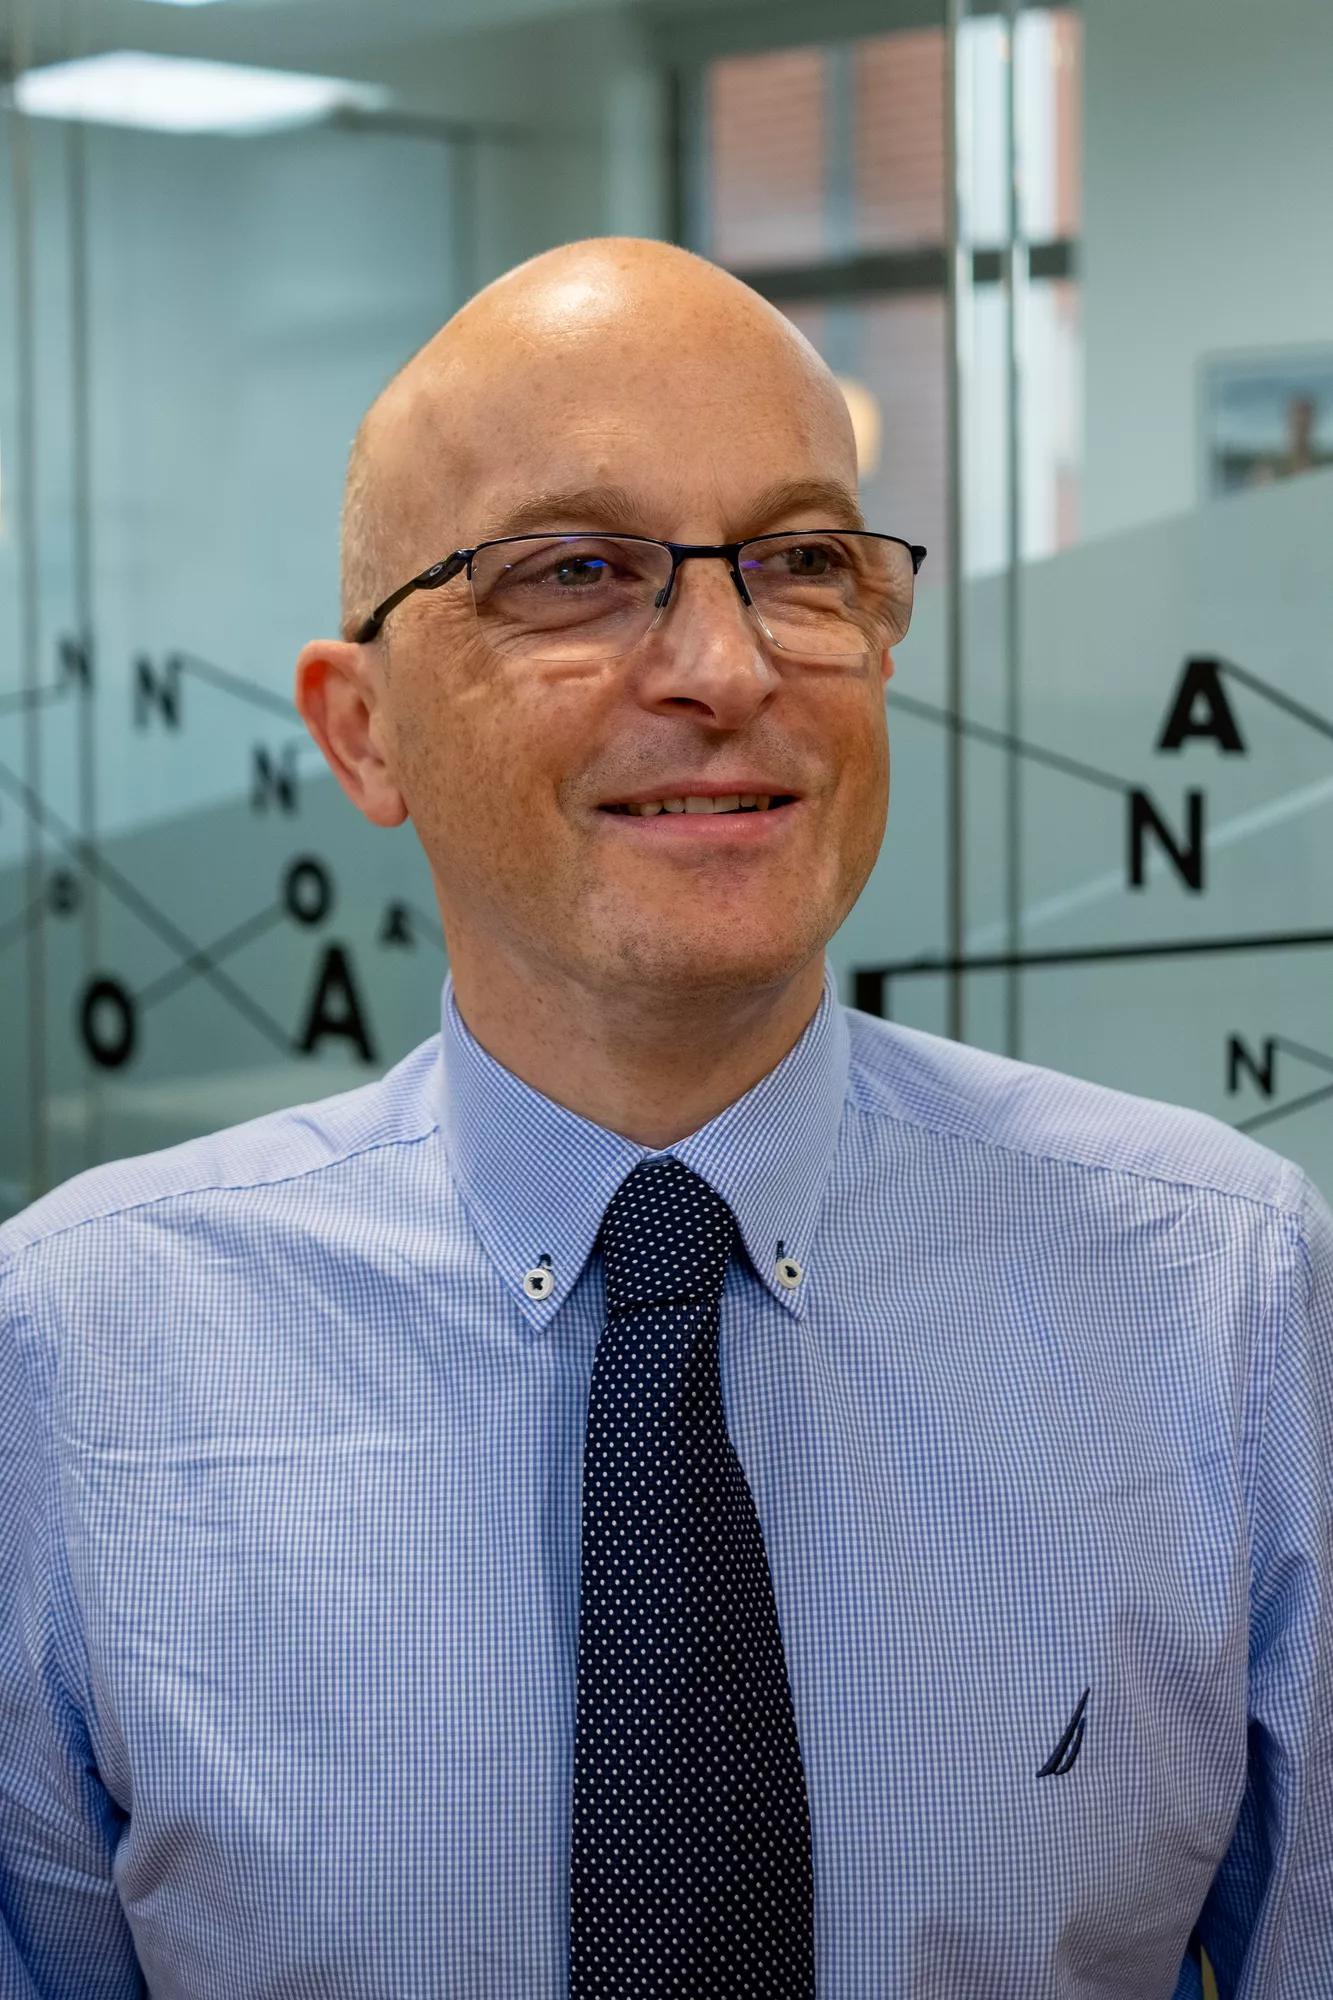  A photo of Dr Robert Danby, Who is Anthony Nolan's Chief Medical and Scientific Officer